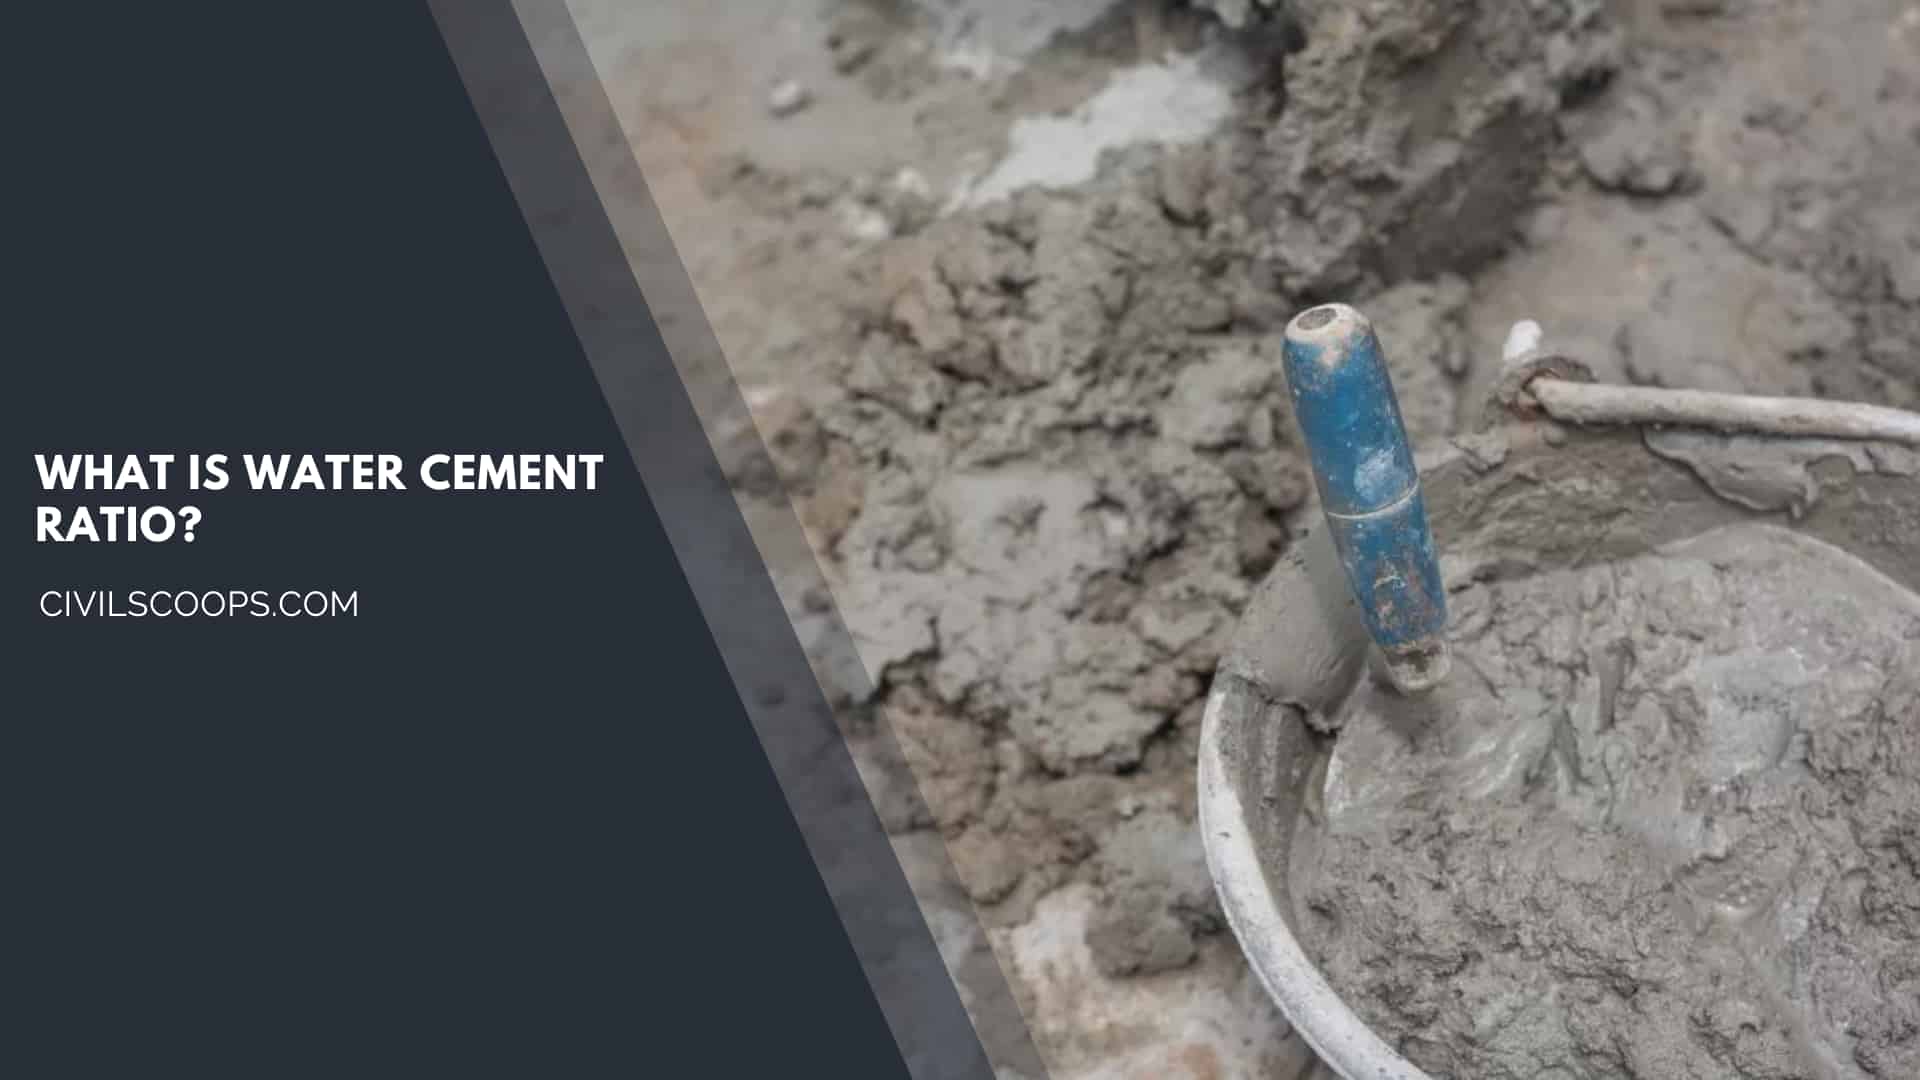 What Is Water Cement Ratio?